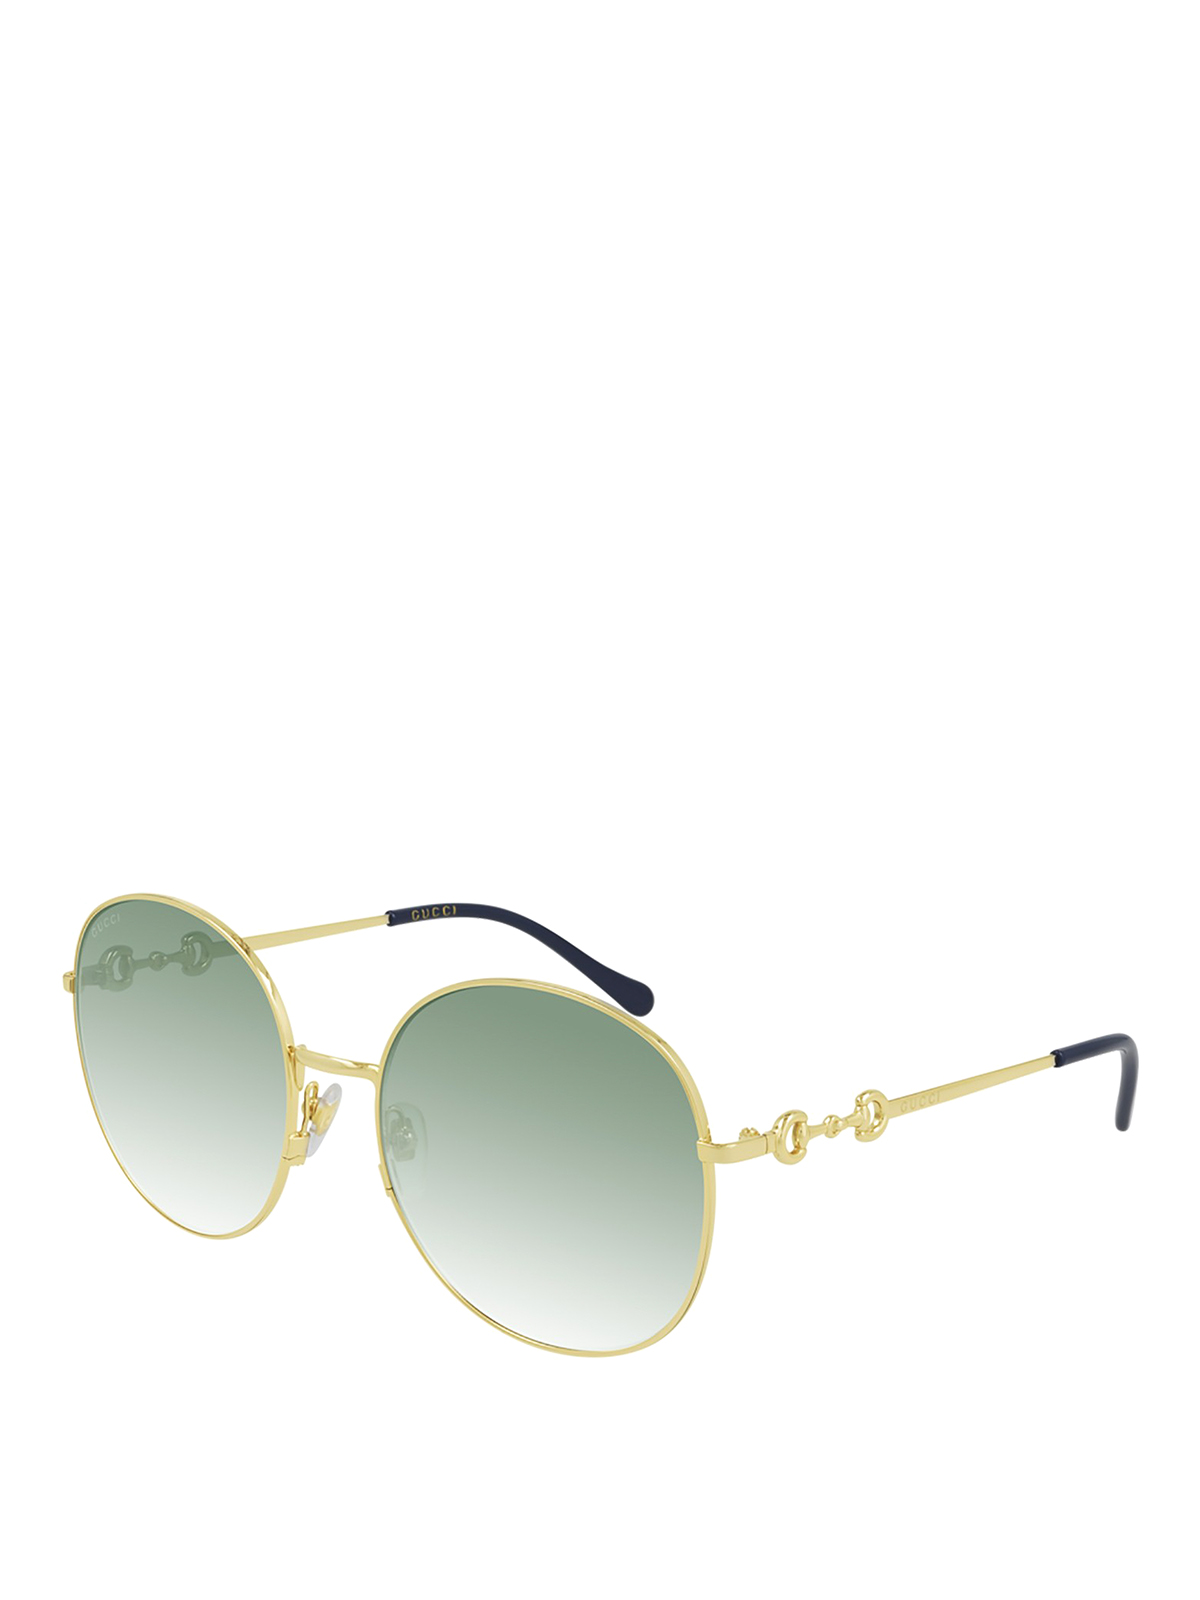 Gucci Rounded Sunglasses In Green